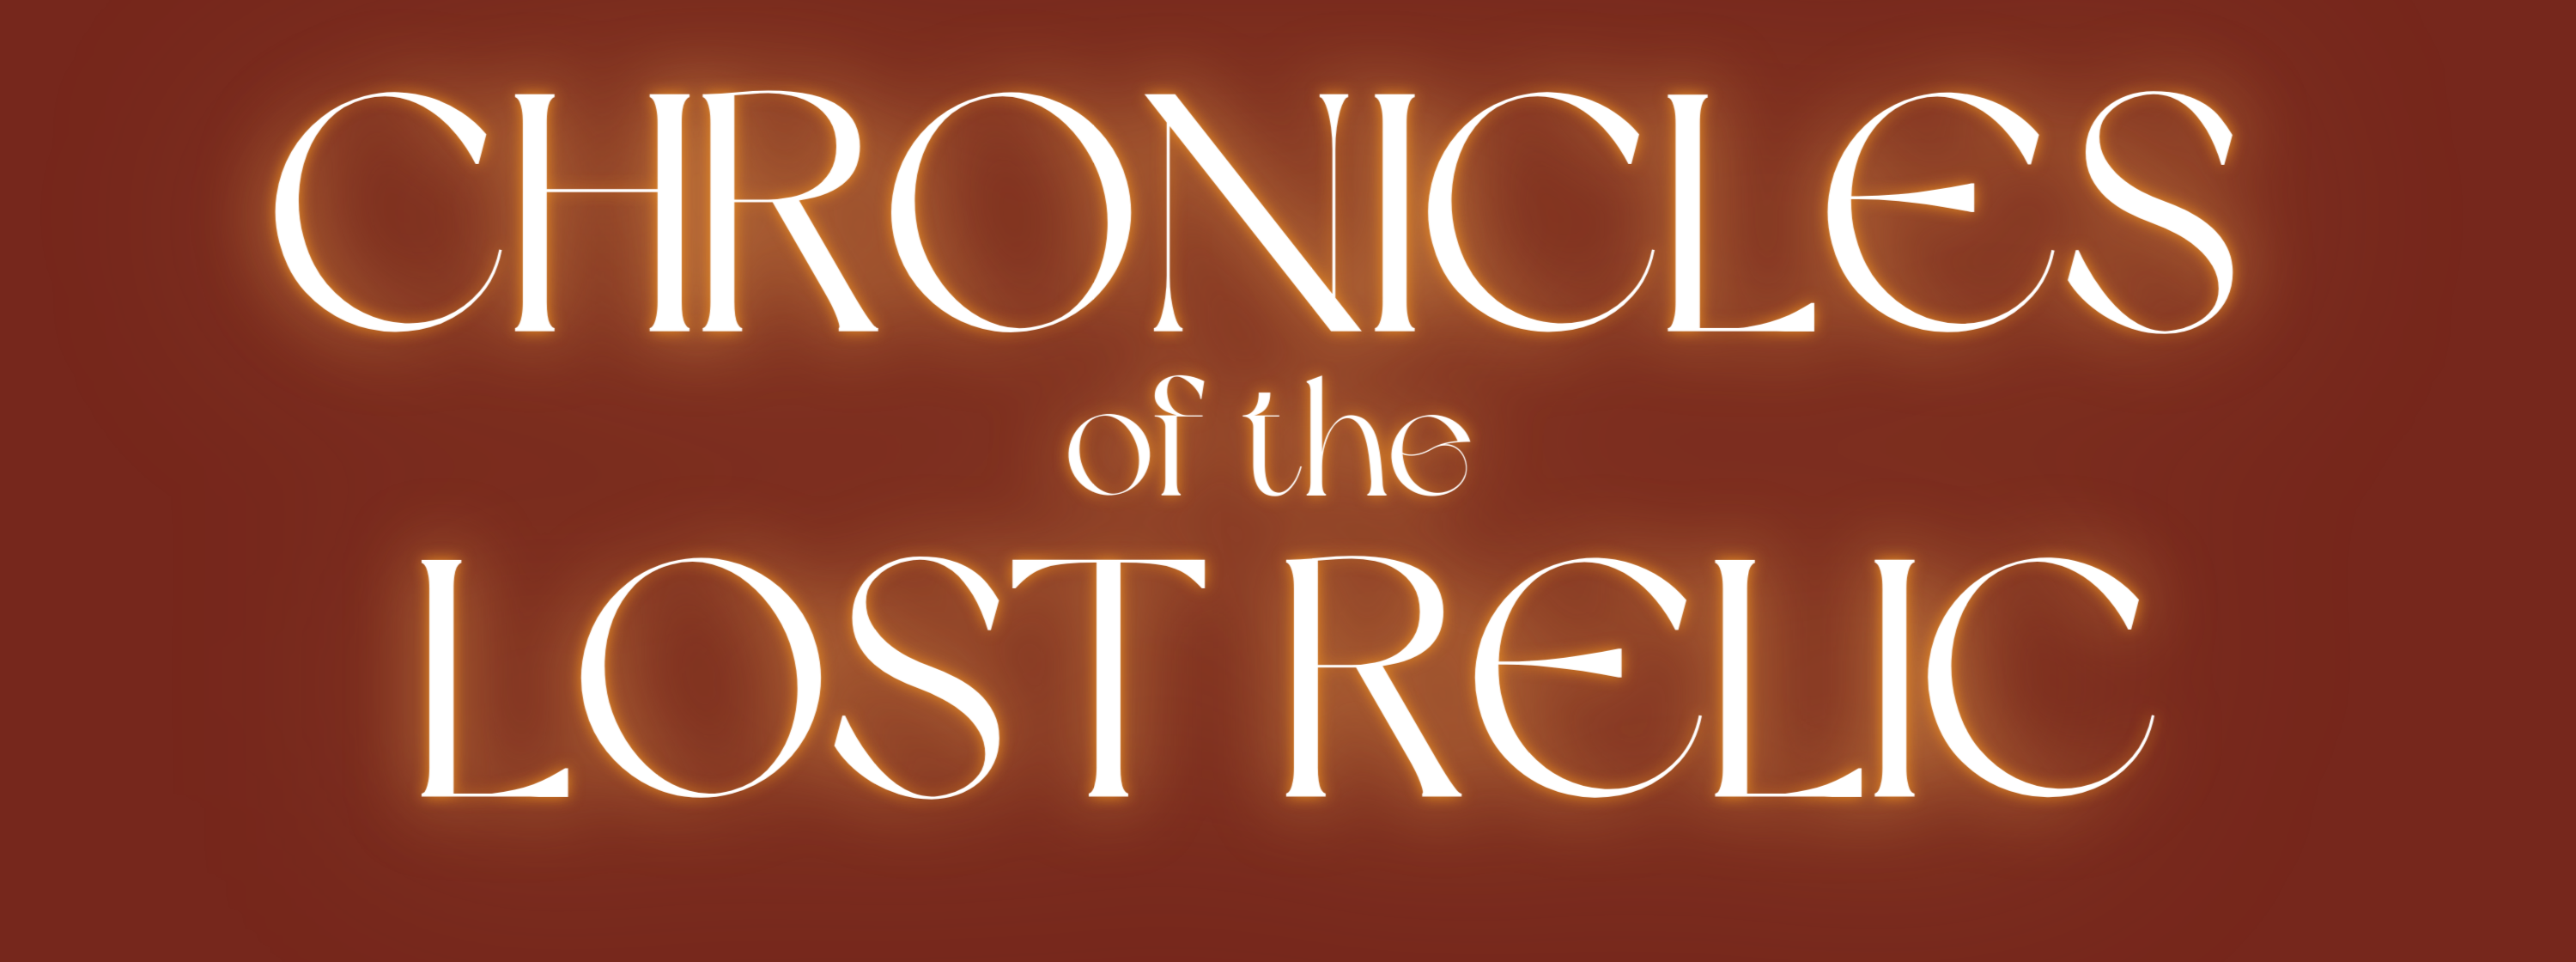 Chronicles of the Lost Relic